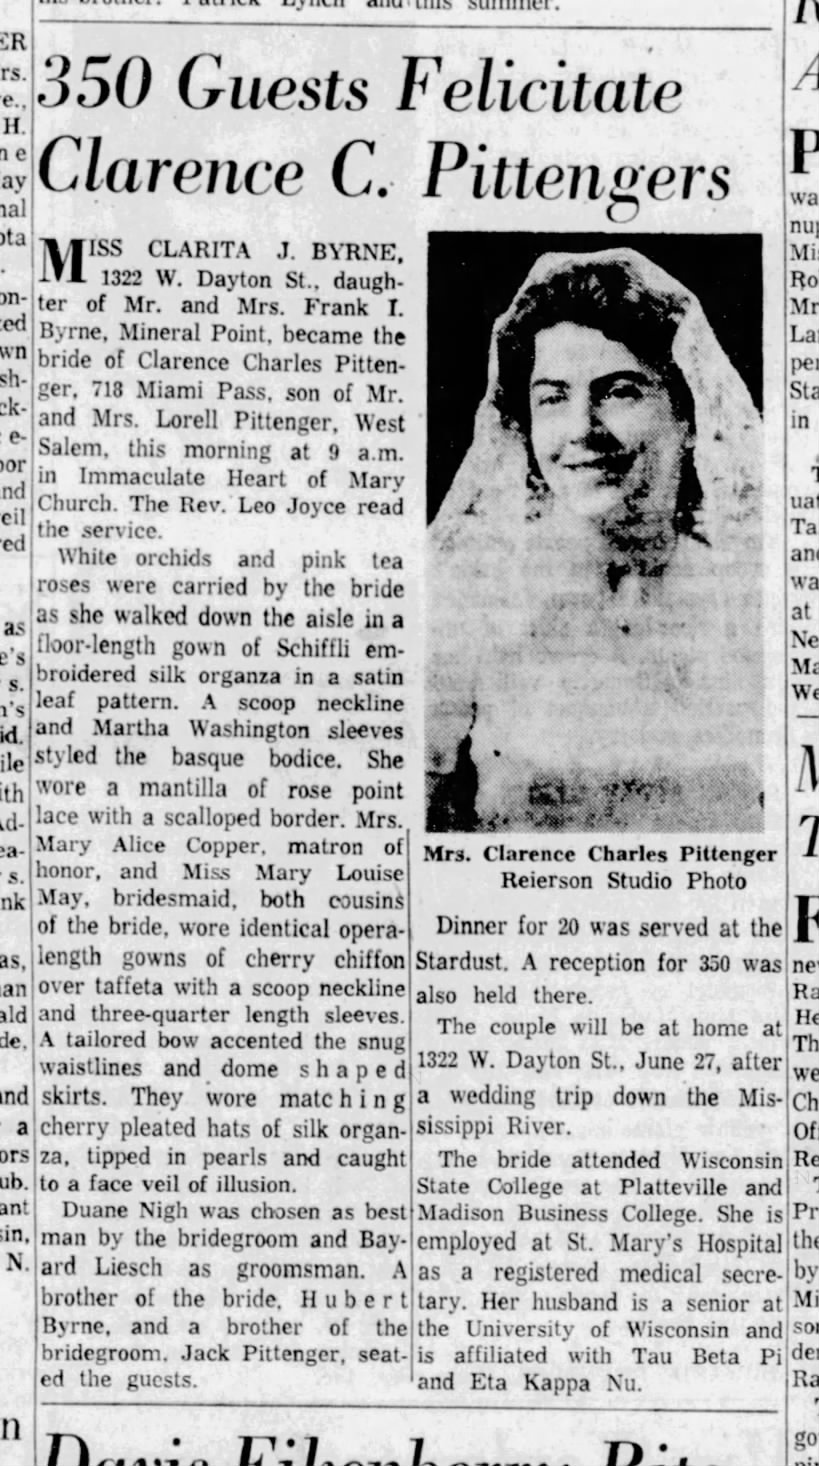 Clarence Pittenger and Clarita Byrne marriage 1960